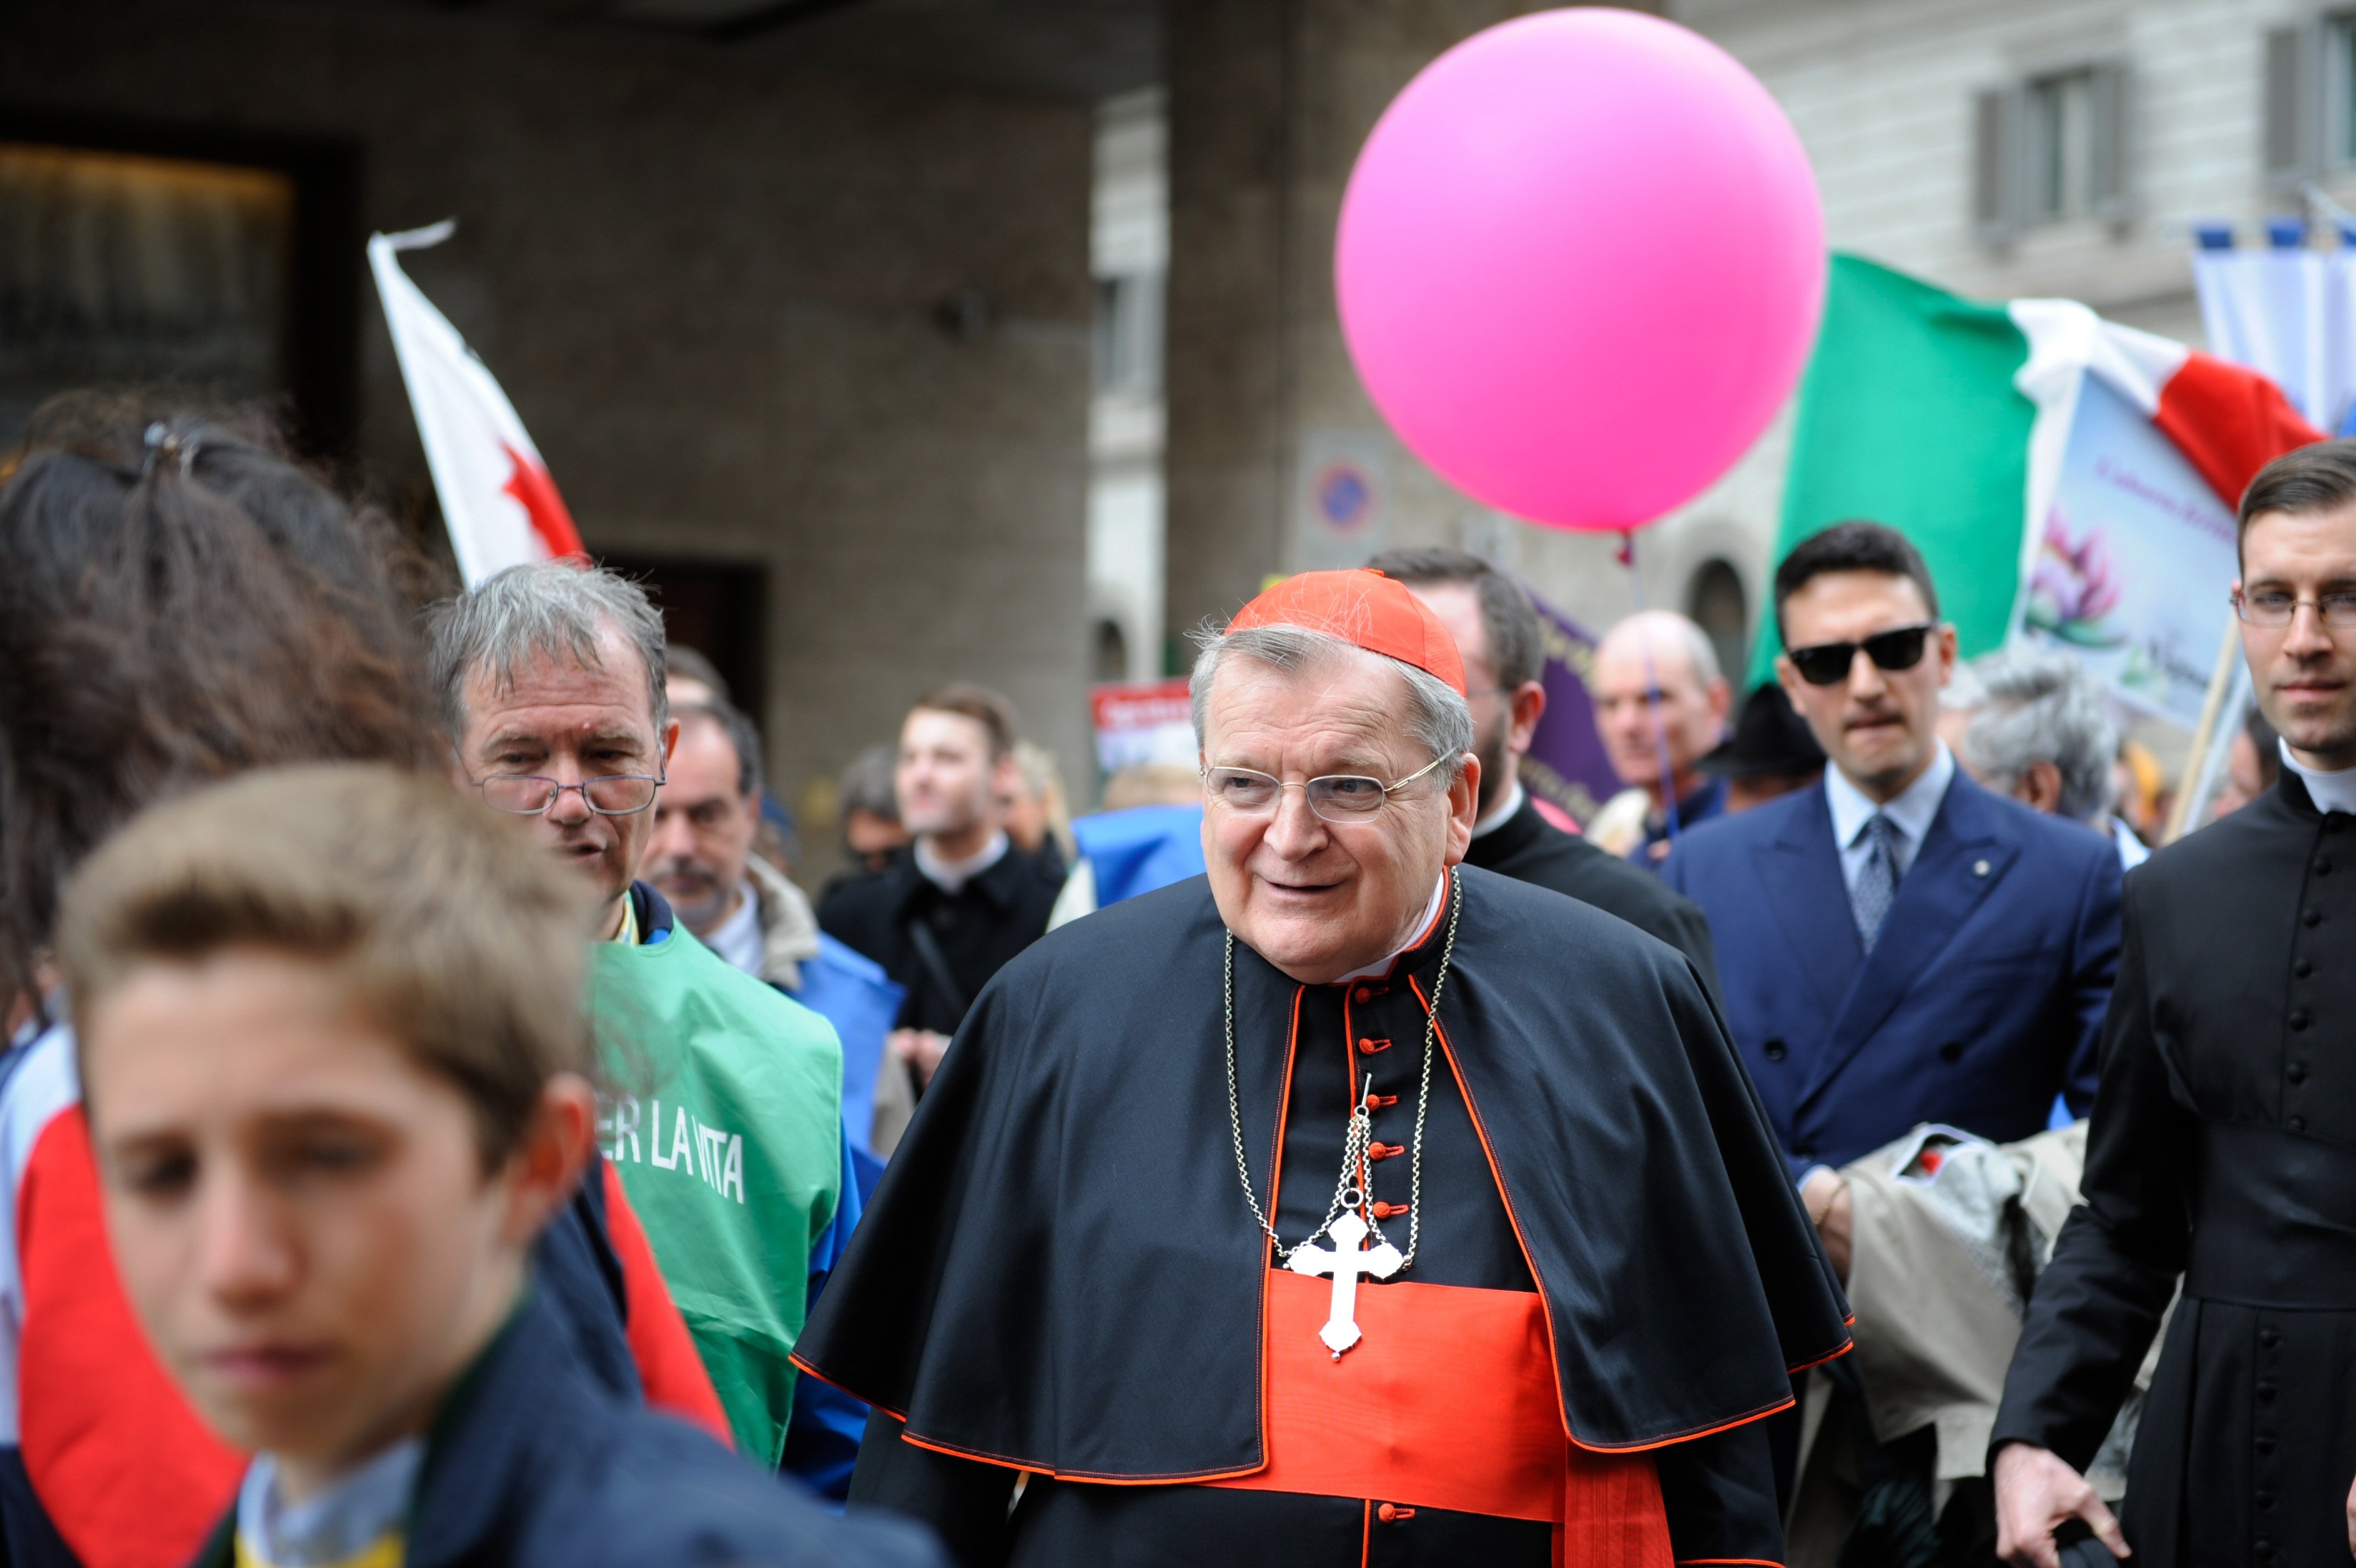 Cardinal Raymond L. Burke walks in the ninth national March for Life in Rome May 18, 2019. The Shrine of Our Lady of Guadalupe in La Crosse, Wis., reported Aug. 21, 2021, that the cardinal, who remained hospitalized for COVID-19, was removed from a ventil